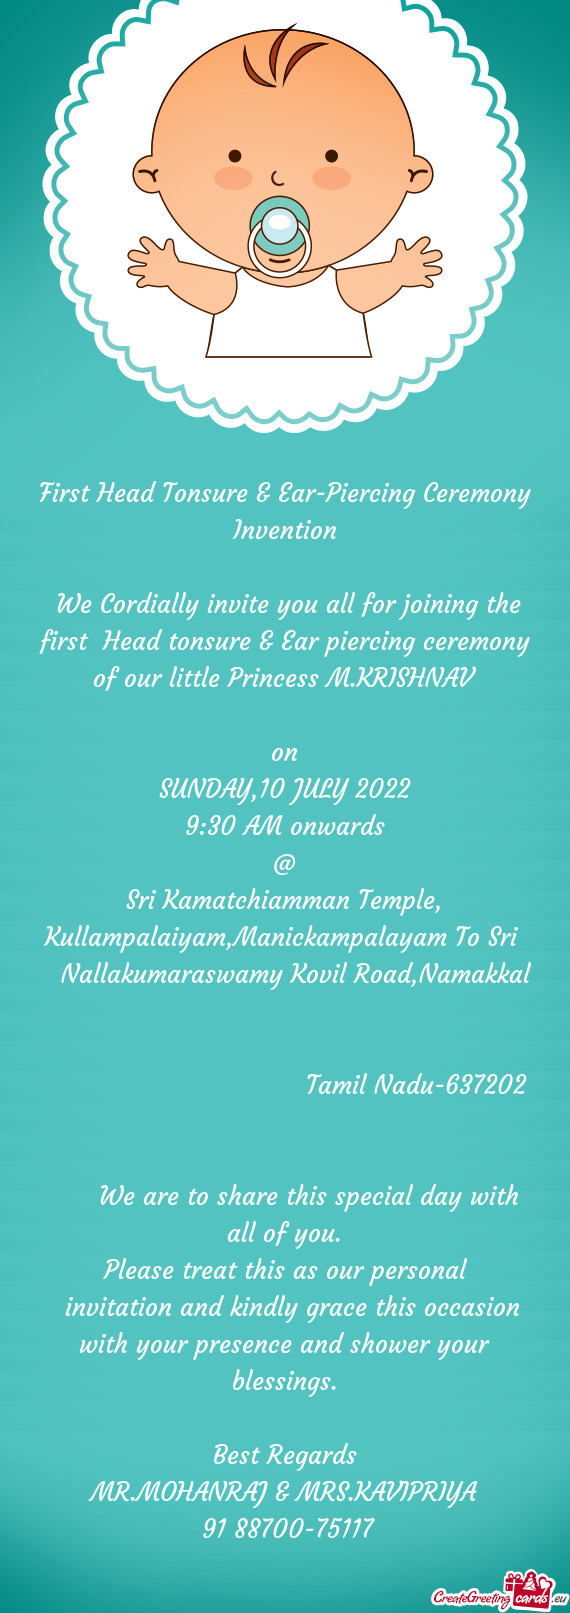 We Cordially invite you all for joining the first Head tonsure & Ear piercing ceremony of our litt